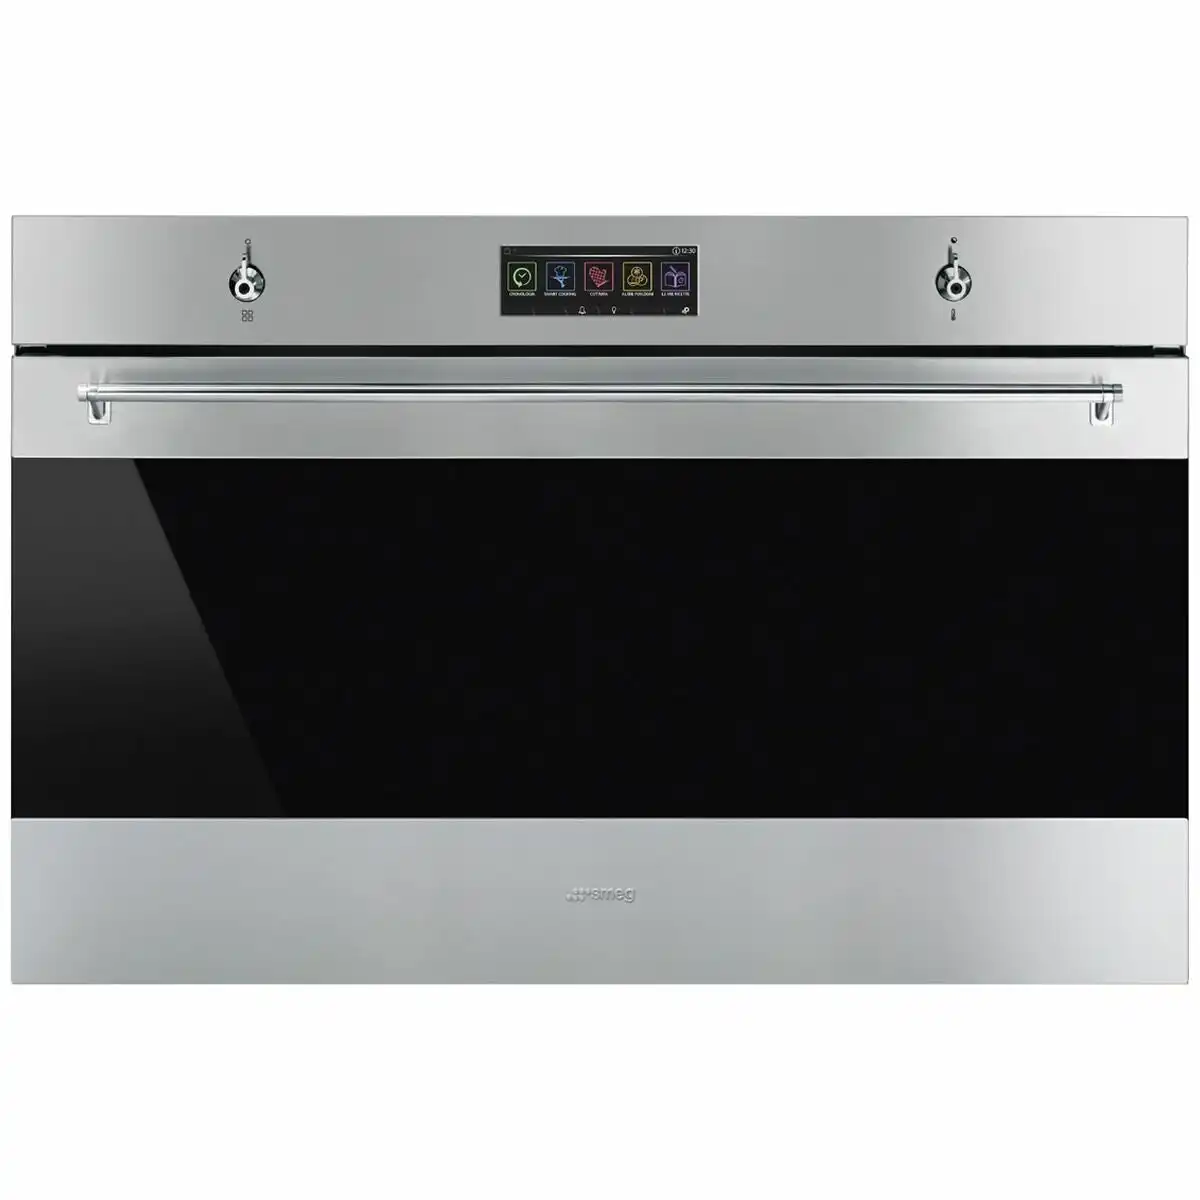 SMEG 90cm Classic Thermoseal Pyrolytic Built-In Oven